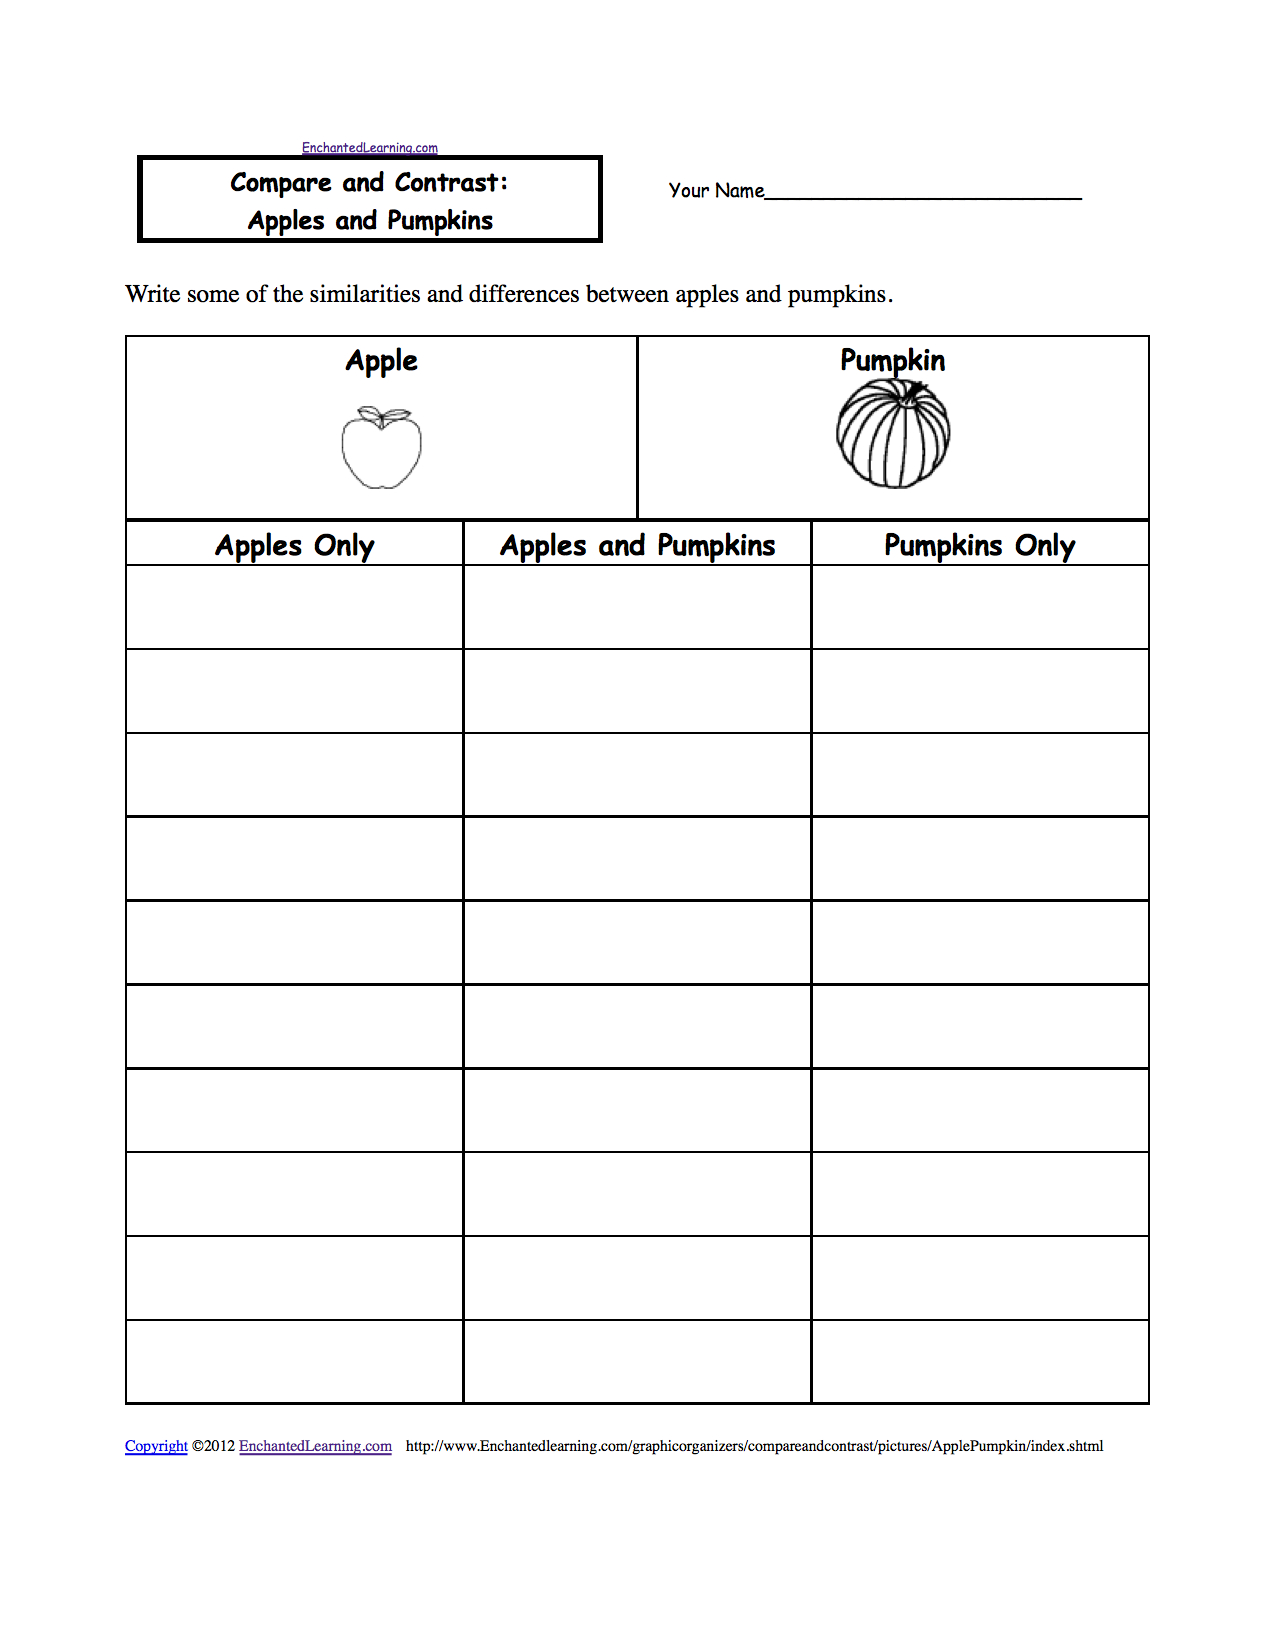 Compare And Contrast: Apple And Pumpkin, A Worksheet | Printable Compare And Contrast Worksheets